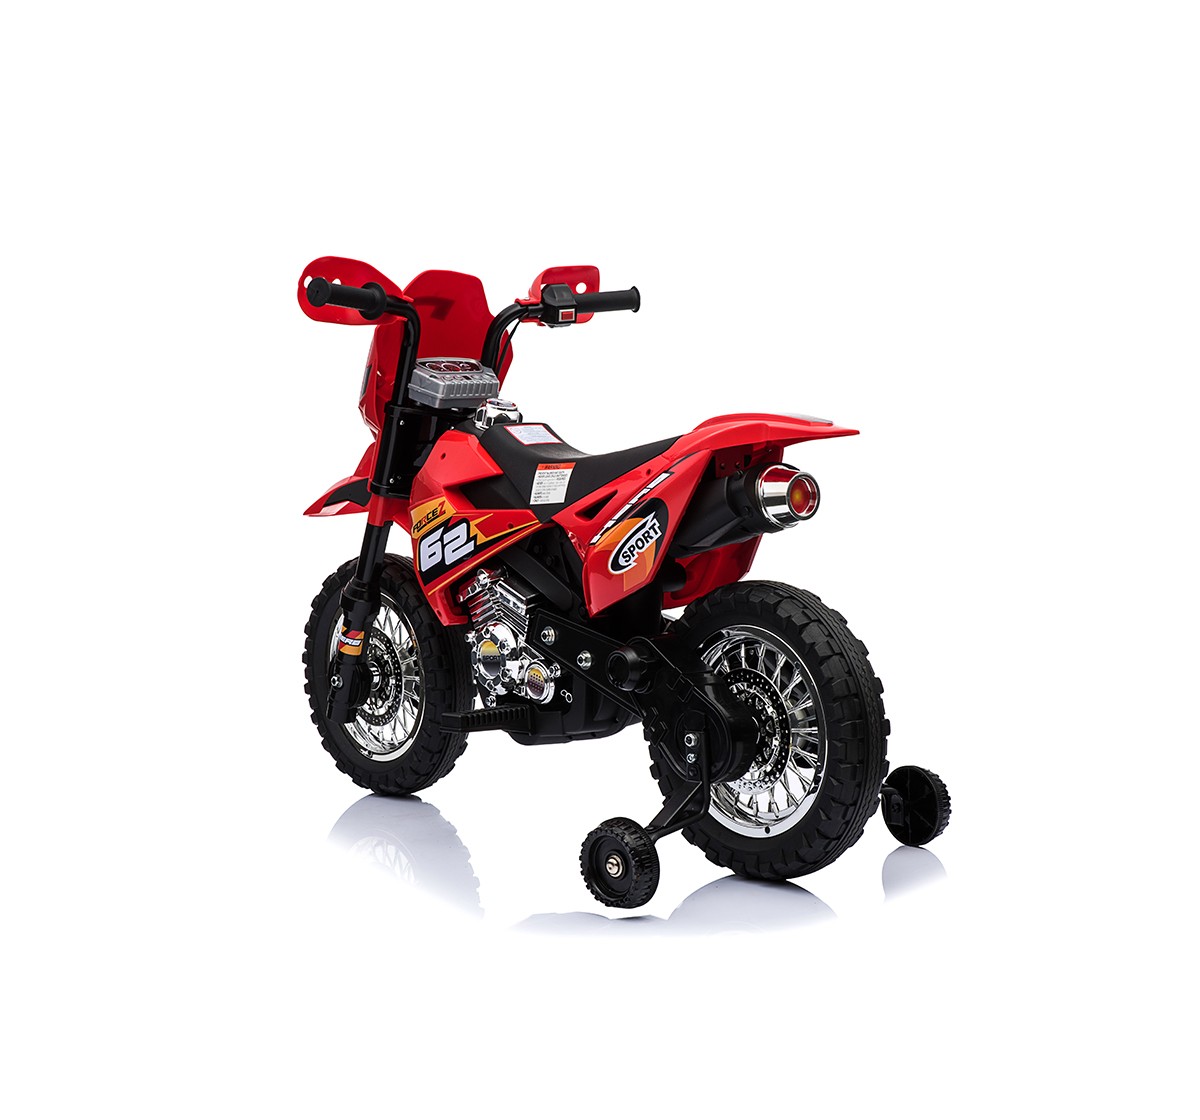 Bettyma 6 Volt Bike With Music And Light - Red Battery Operated Rideons for Kids age 3Y+ (Red)